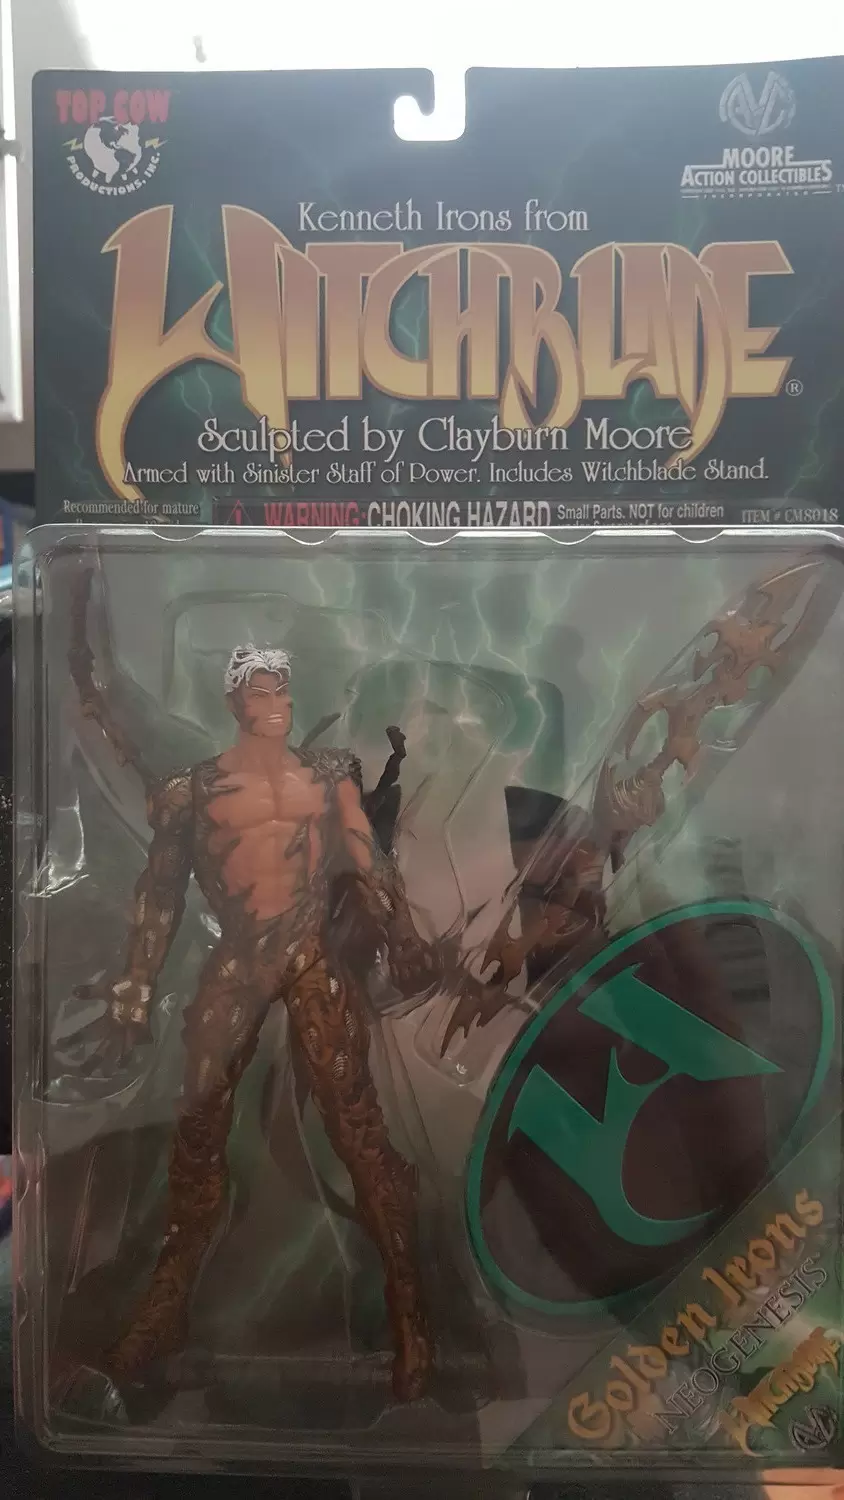 Moore Action Collectibles - Witchblade Series 1 Neogenesis Golden Irons